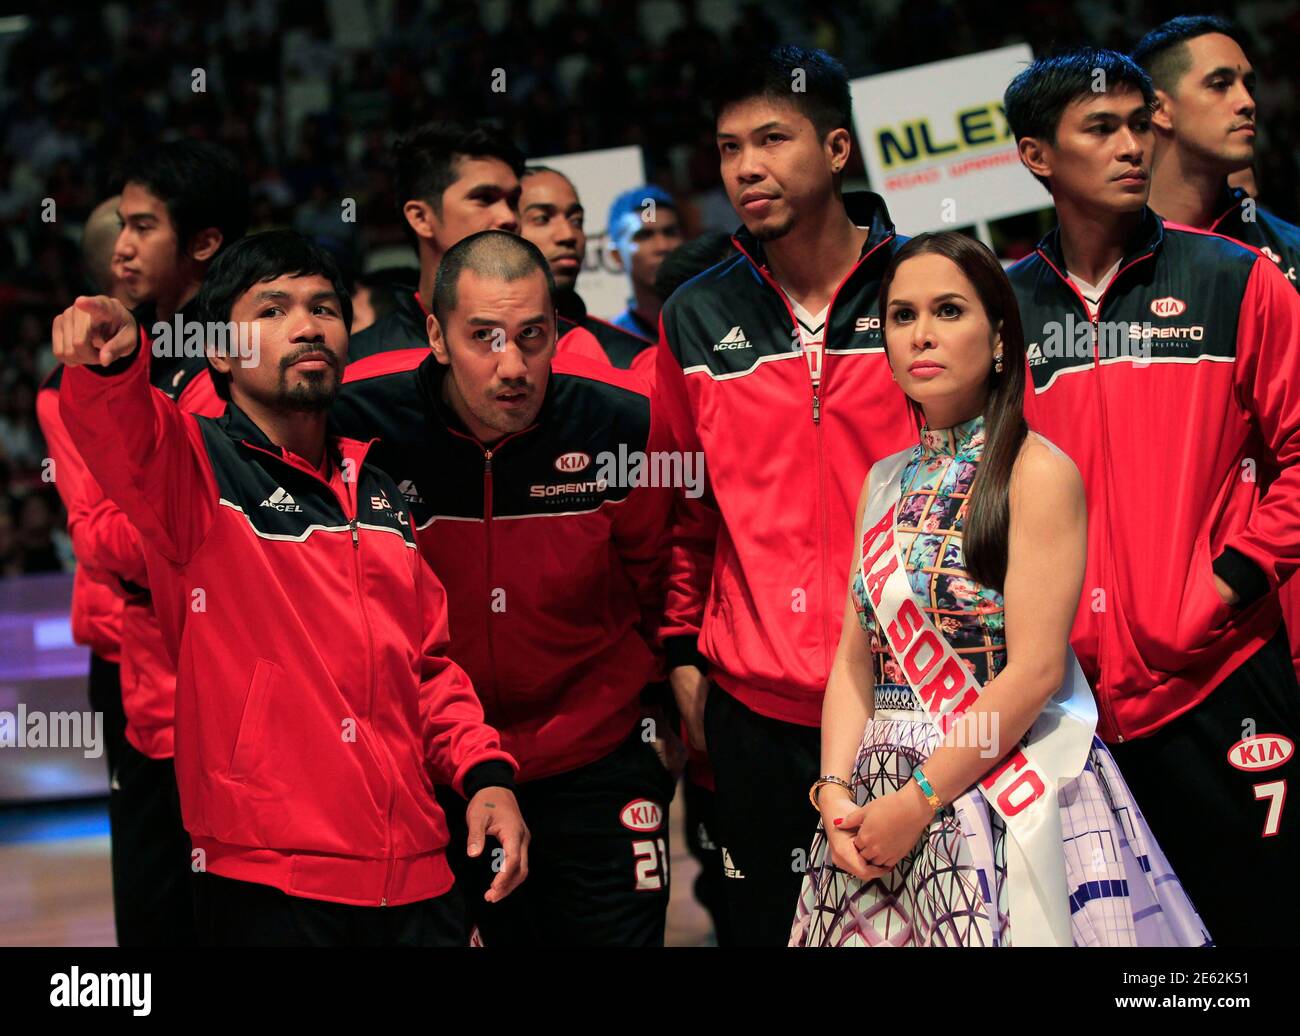 Manny Pacquiao (L), the playing coach of gesture as he joins his teammates during the opening of the 40th Season of the Philippine Basketball Association (PBA) games, against the Blackwater-Elite, in